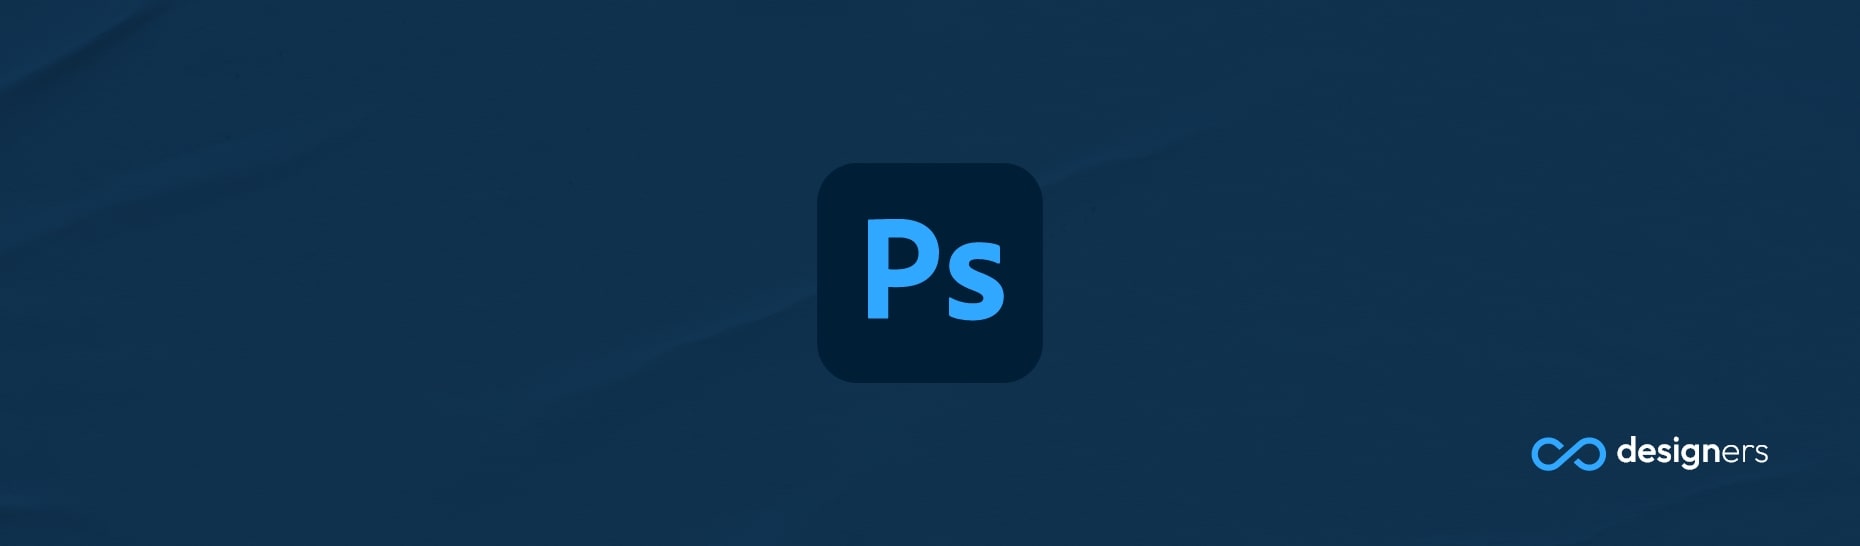 Can You Edit a GIF File With Photoshop? | design tools tutorials and guides